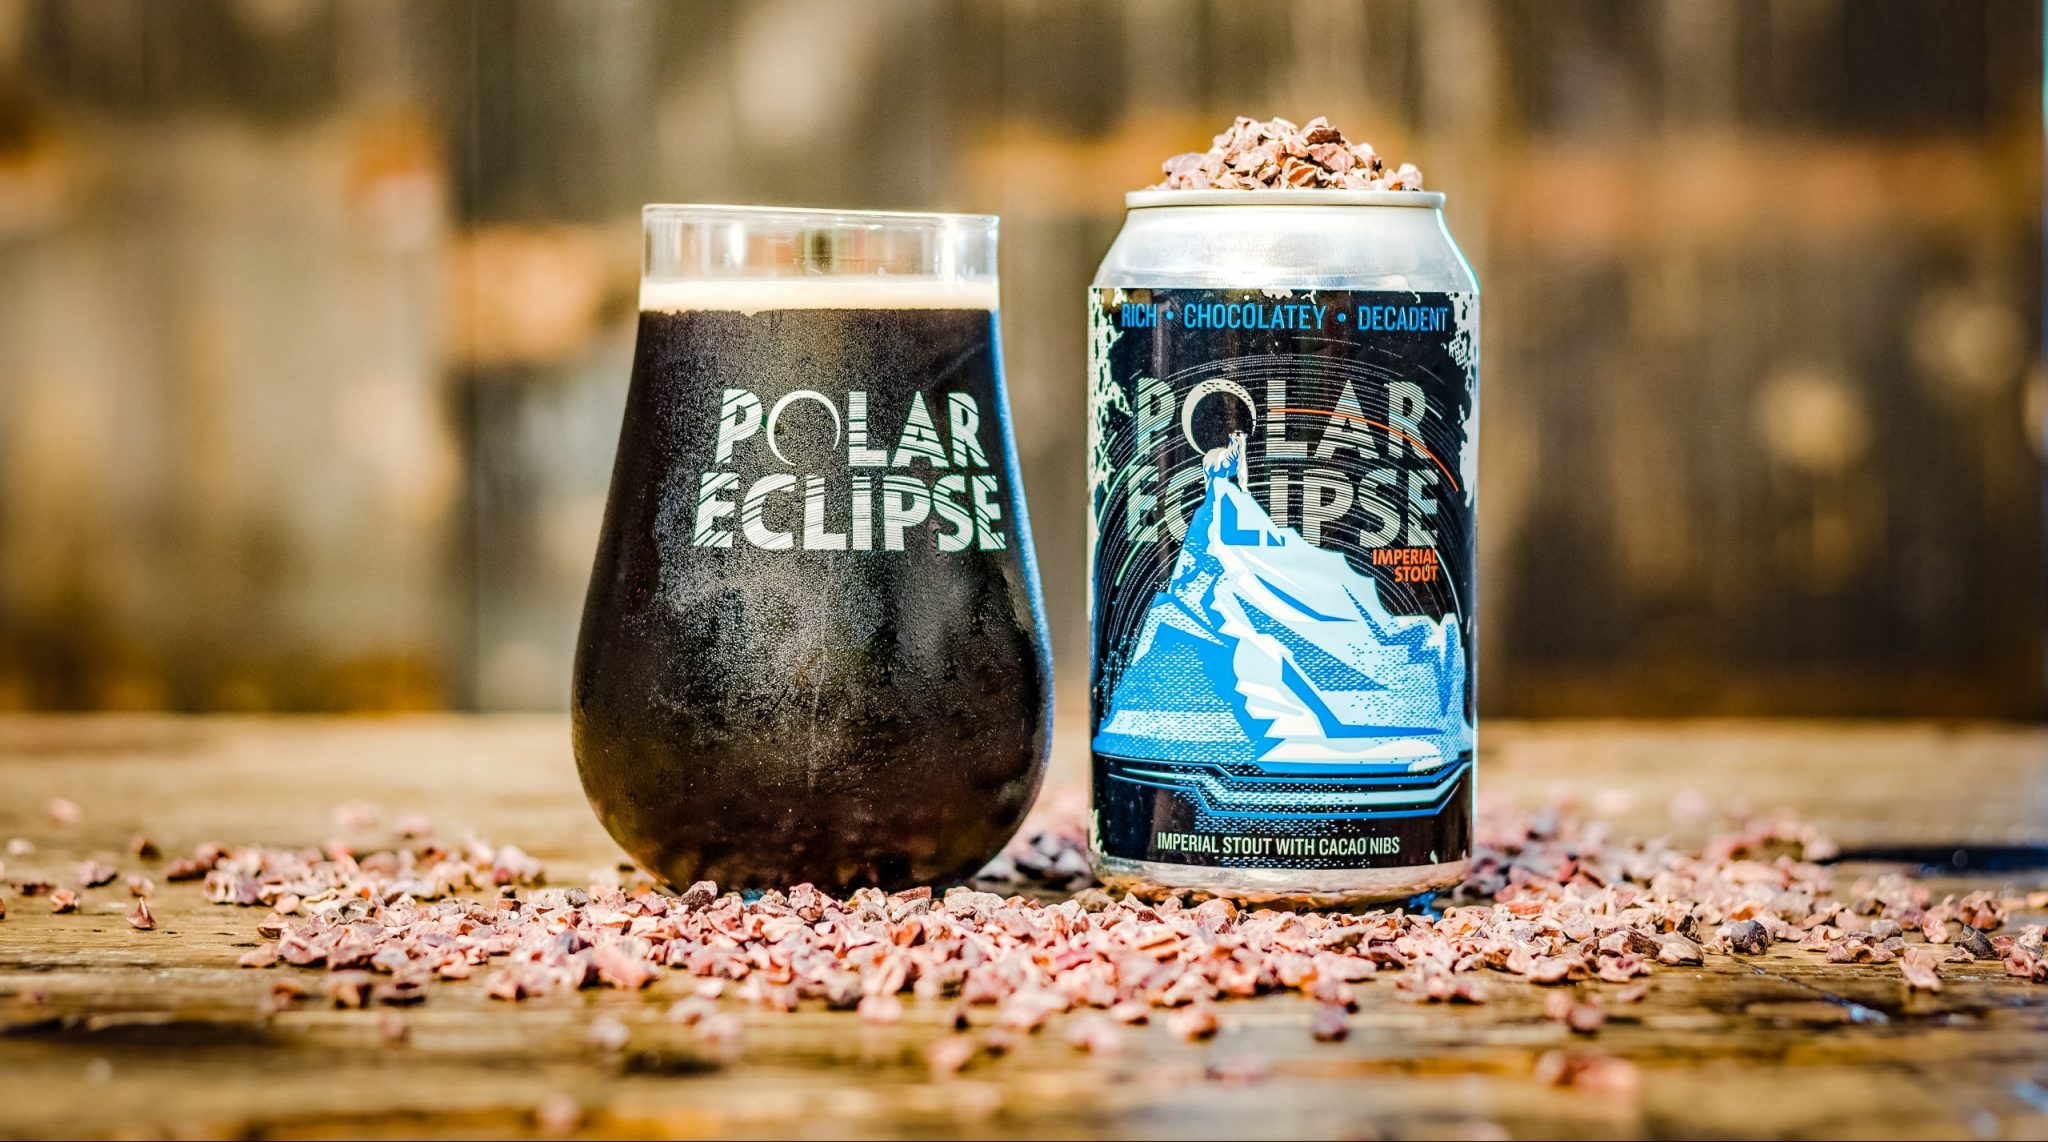 Polar Eclipse Roughtail Brewing Company